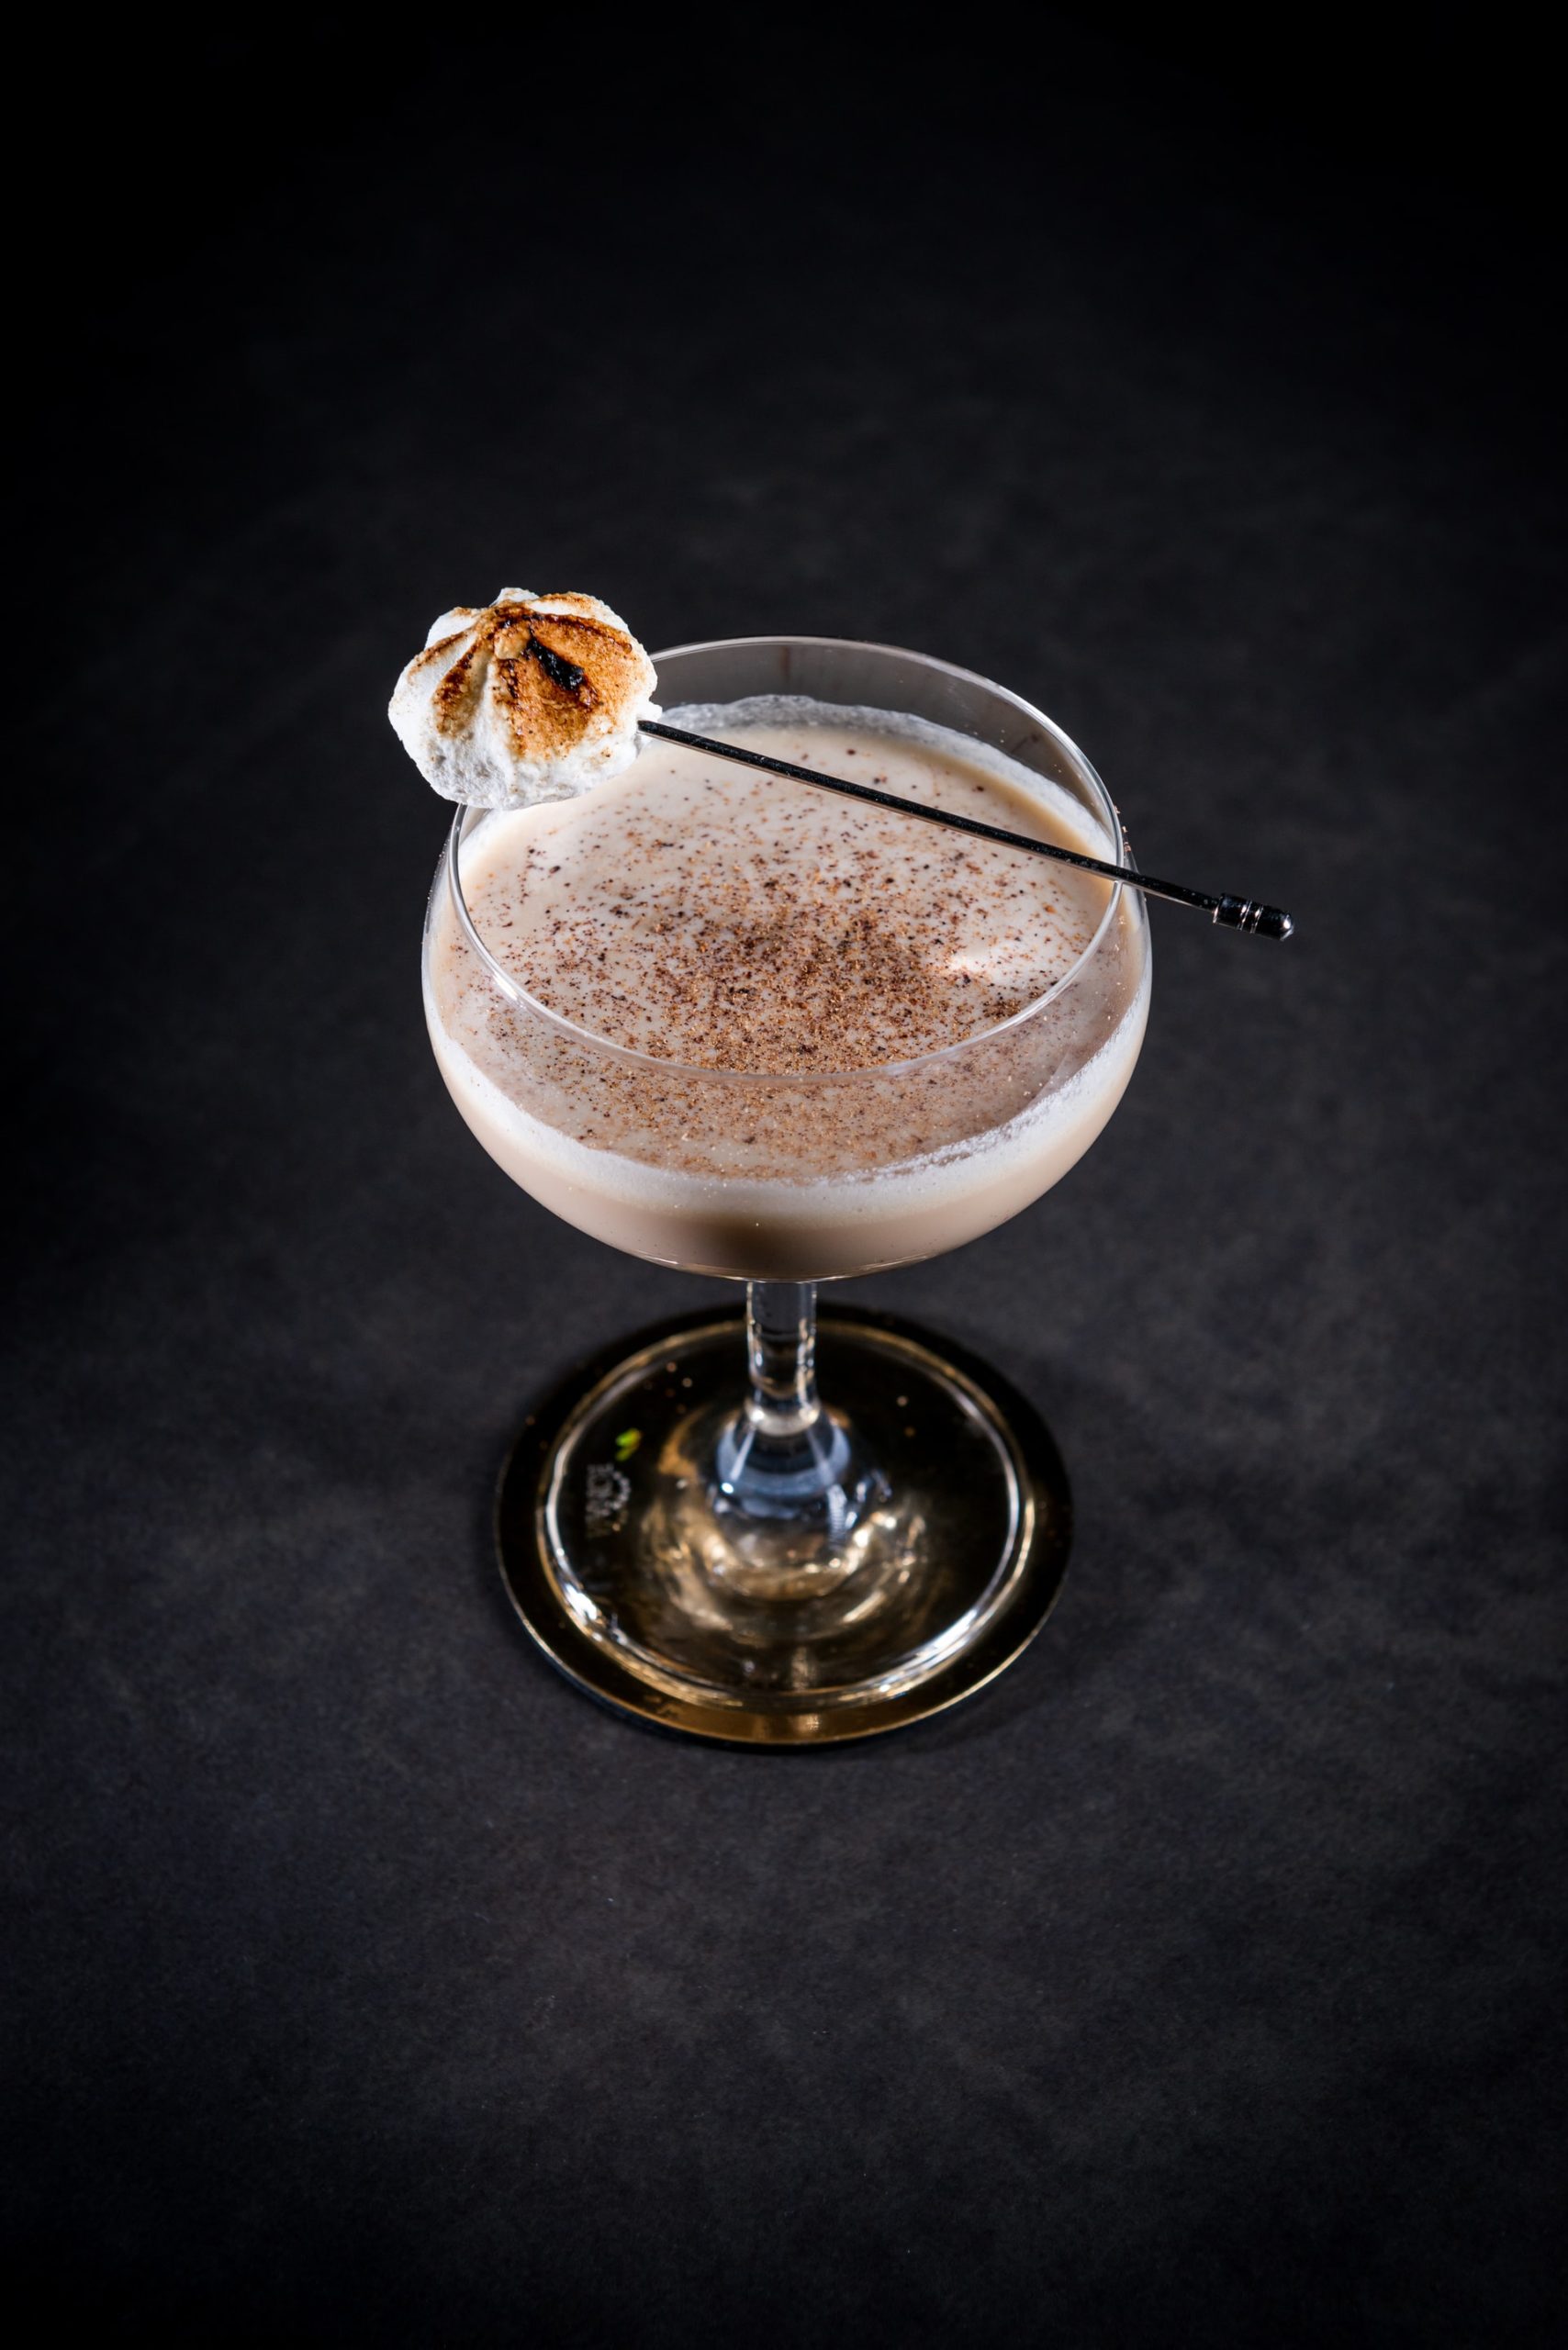 A creamy Cinnamon Toast Crunch cocktail in a coup glass with a toasted marshmallow on a skewer and sprinkle of cinnamon on top